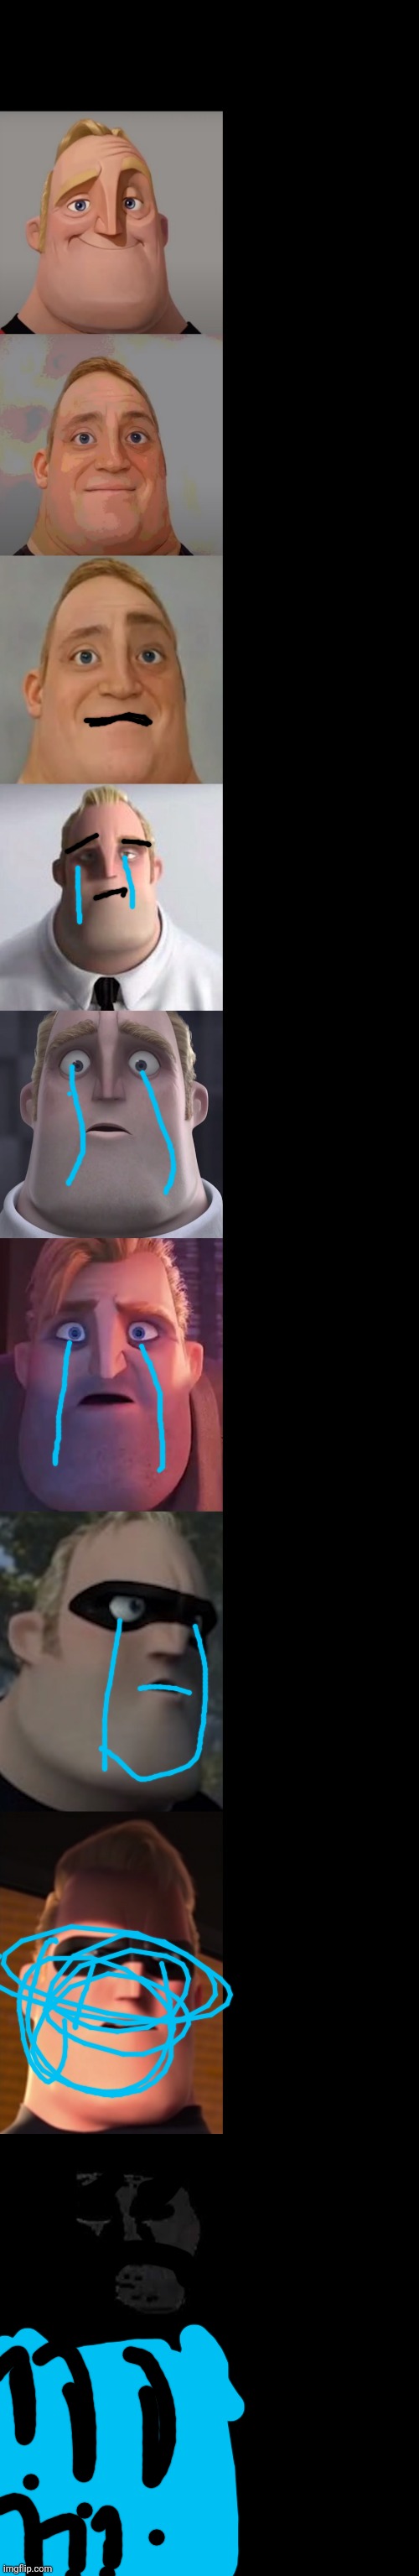 MR INCREDIBLE BECOMING SAD AND CONFUSED | image tagged in mr incredible becoming confused | made w/ Imgflip meme maker